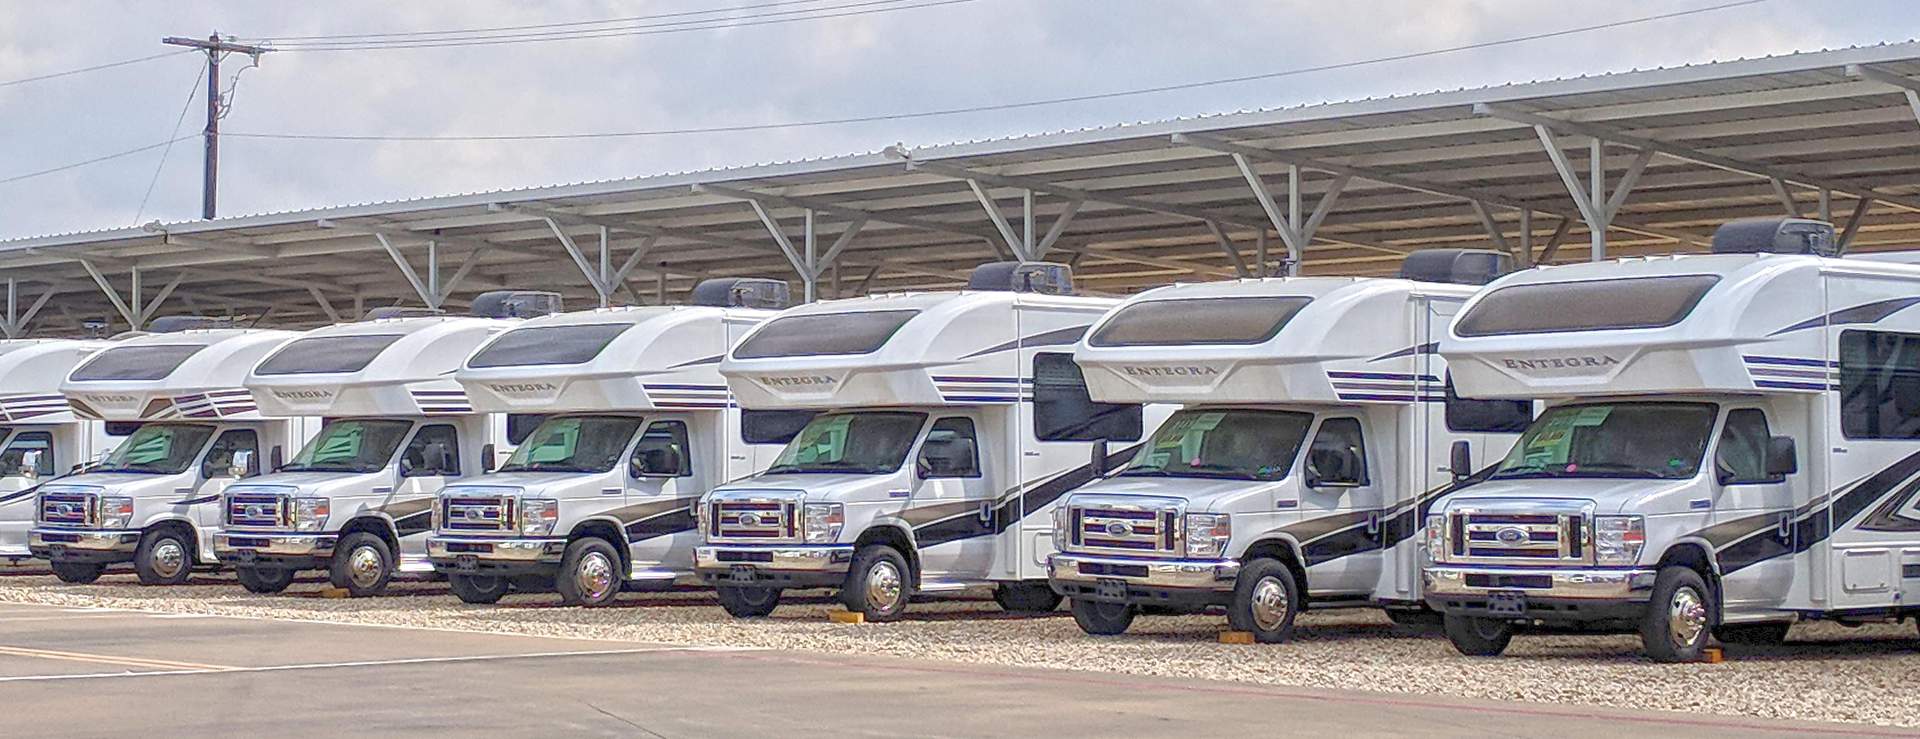 3 Best RV Shows in the US